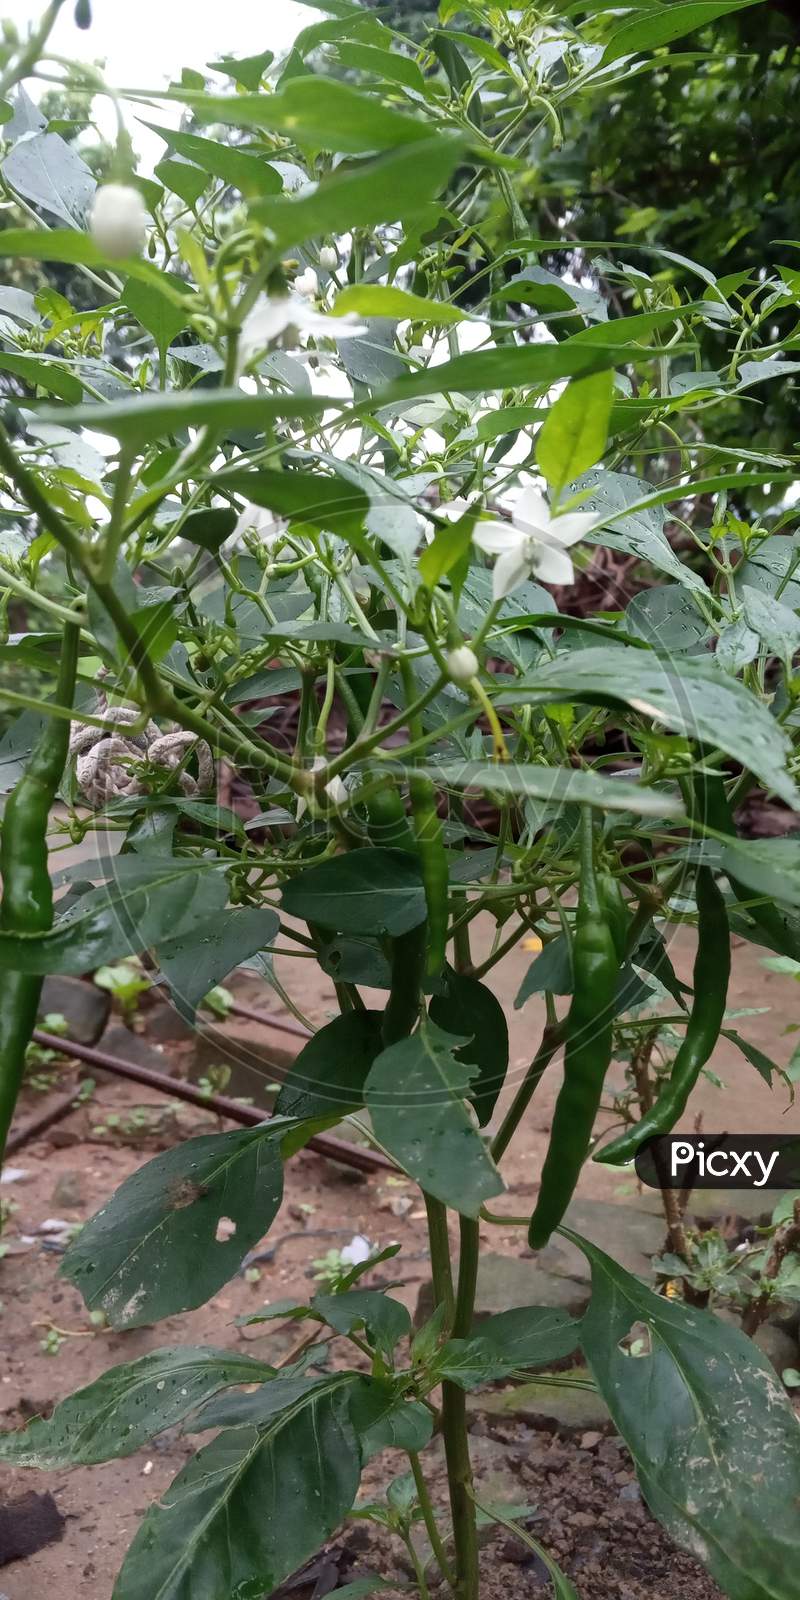 Green chili plant and it's White flower that looks